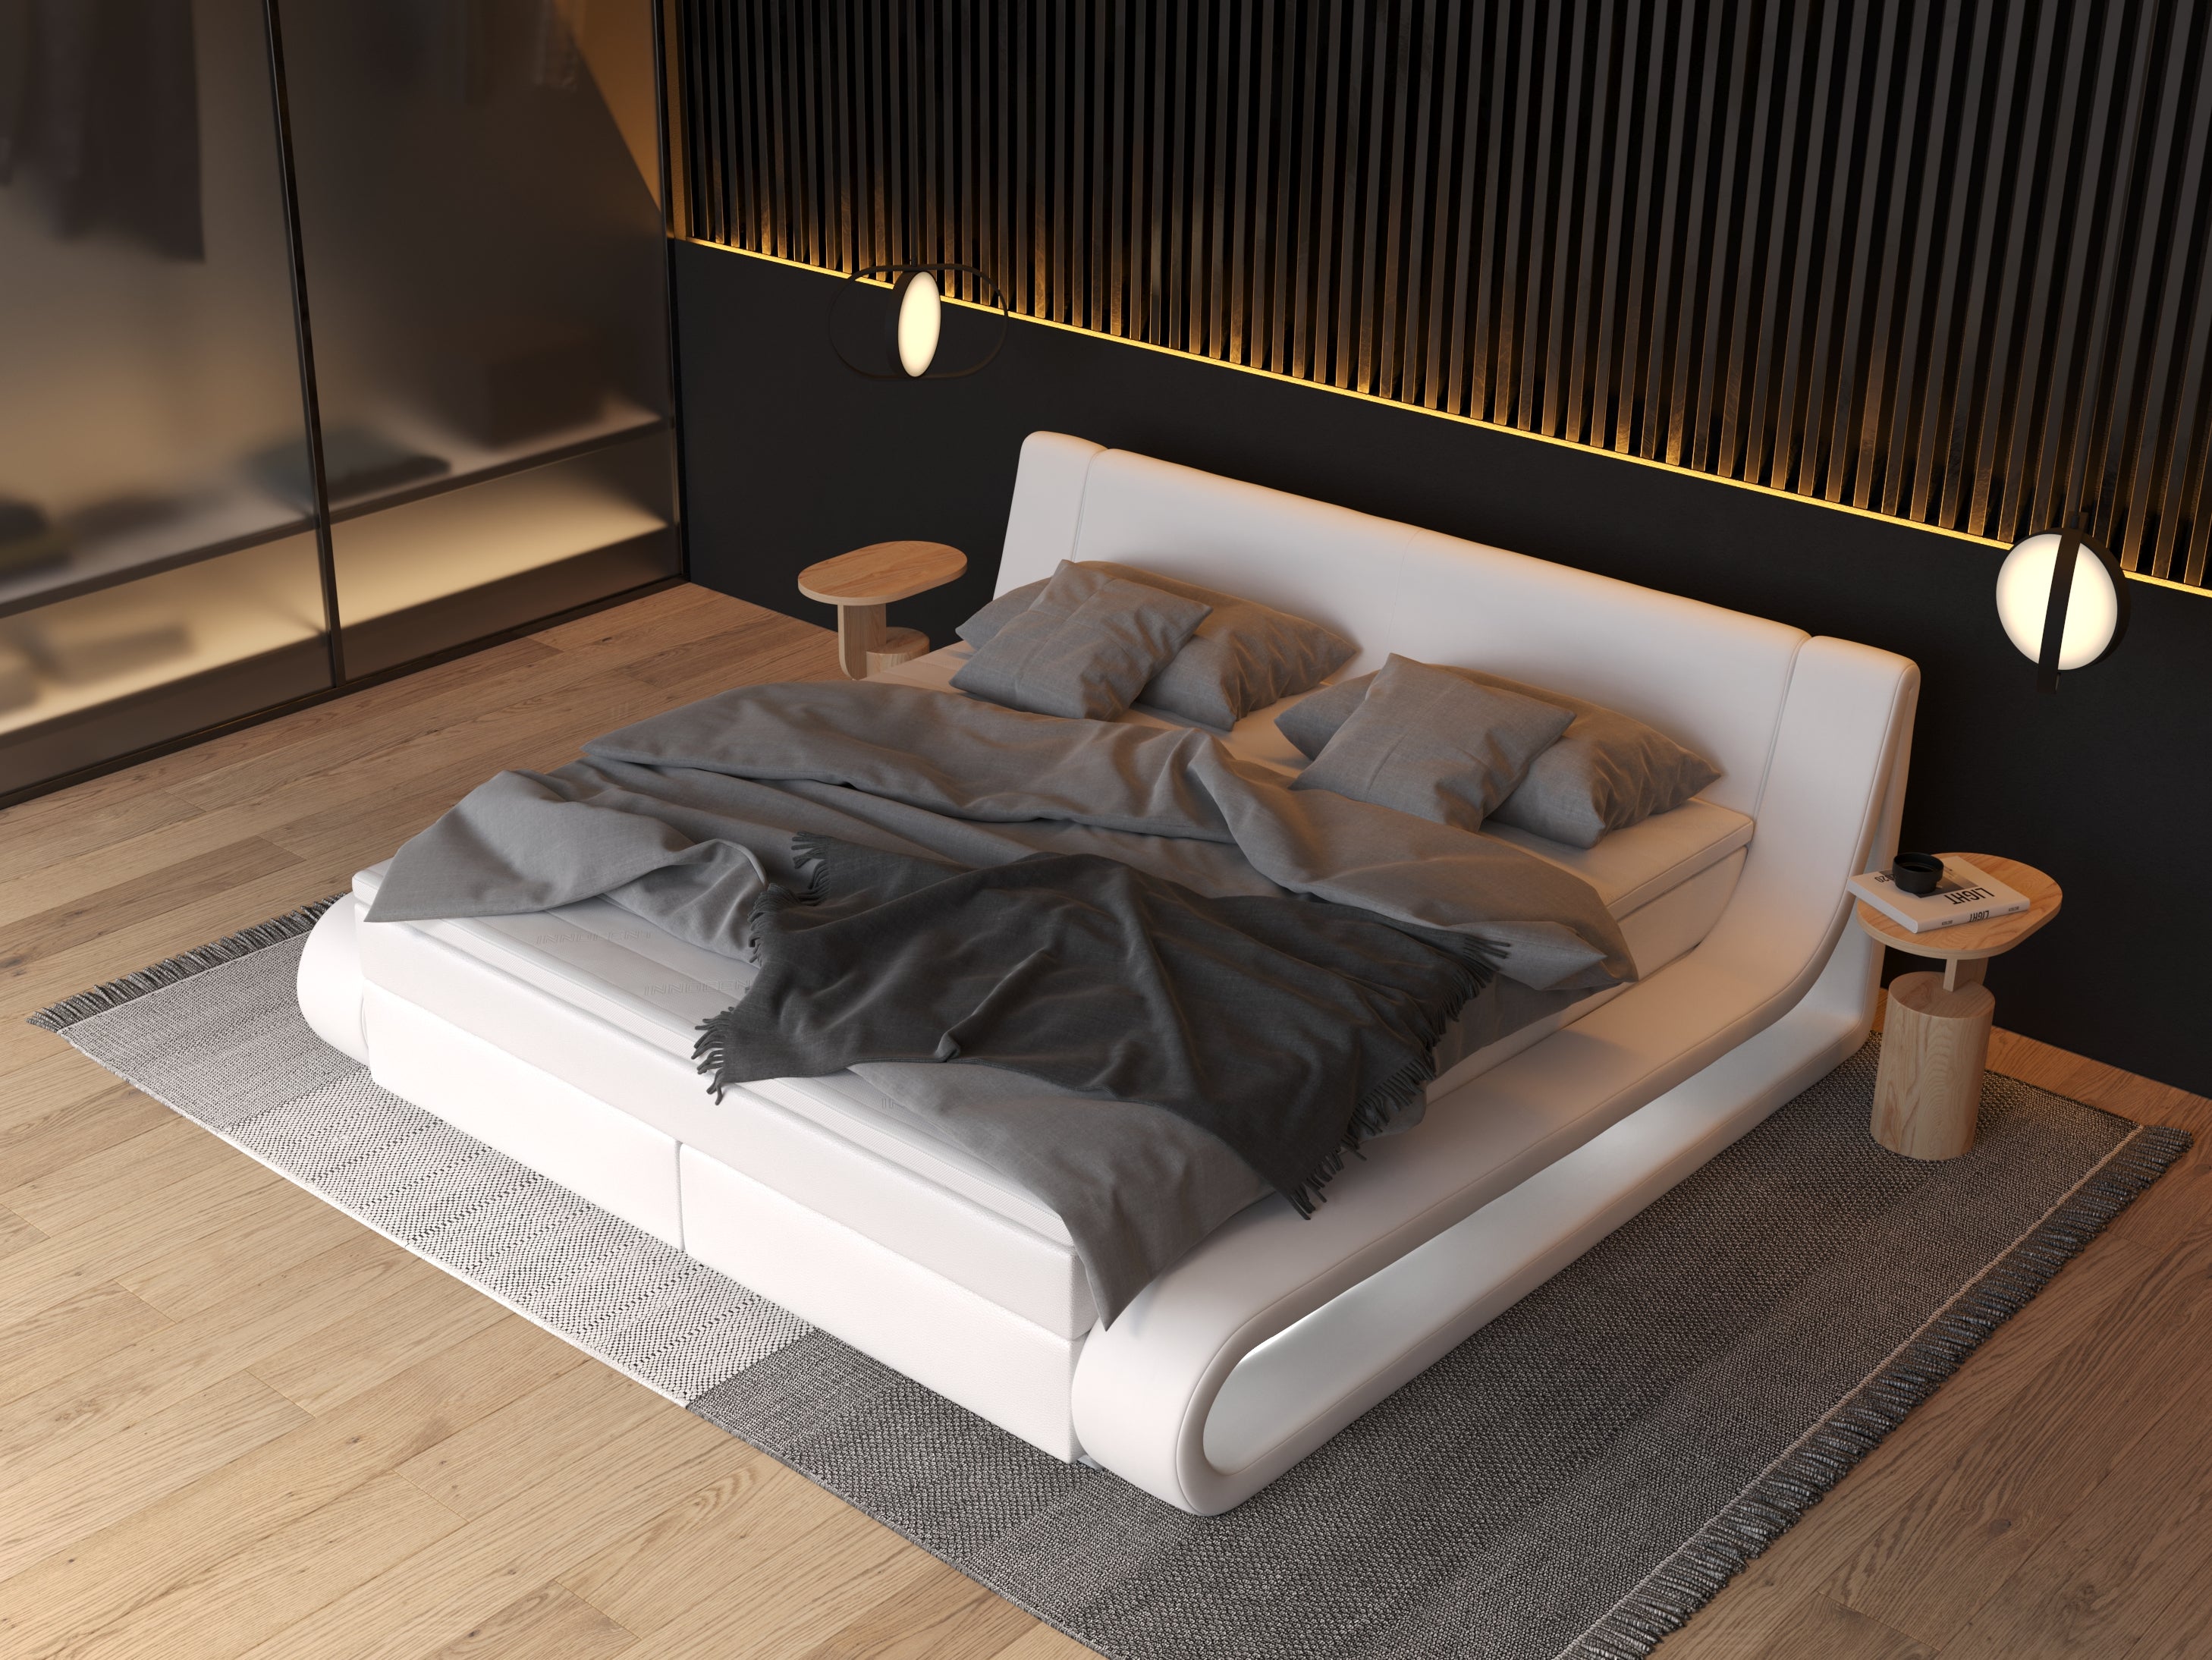 BOX-121-VILLARI: Revolutionary Boxspringbed for Unmatched Comfort and Style